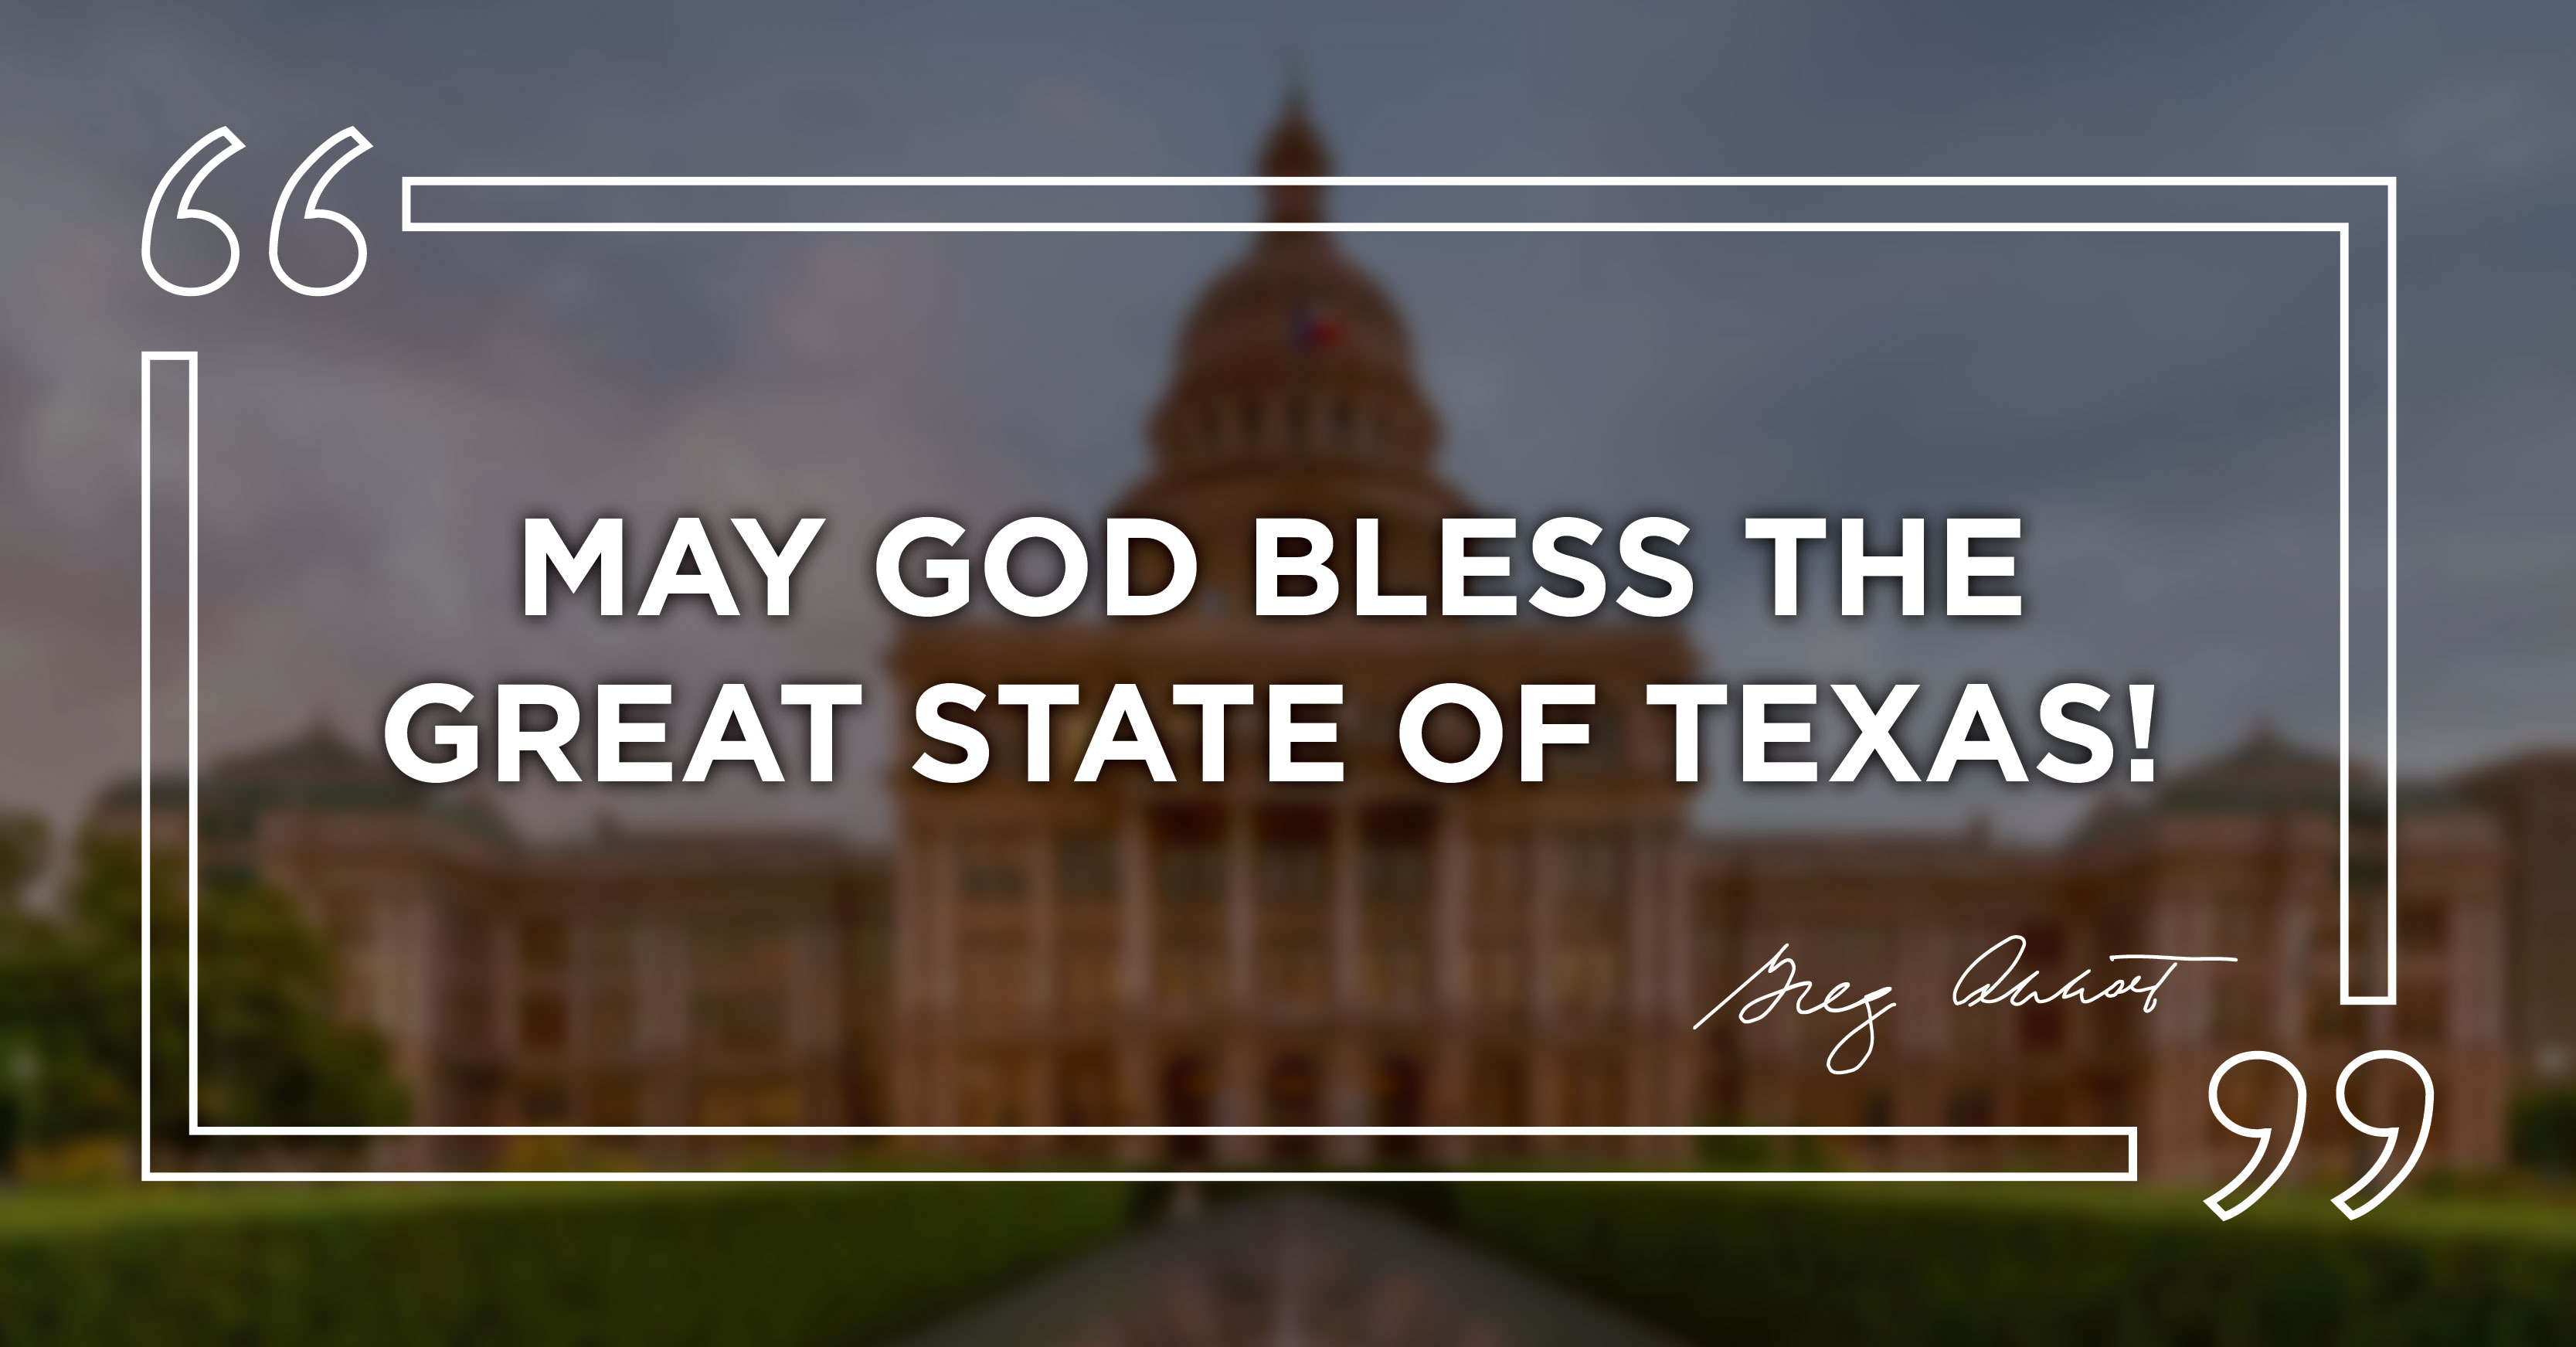 Texas - The Greatest Country in the World.